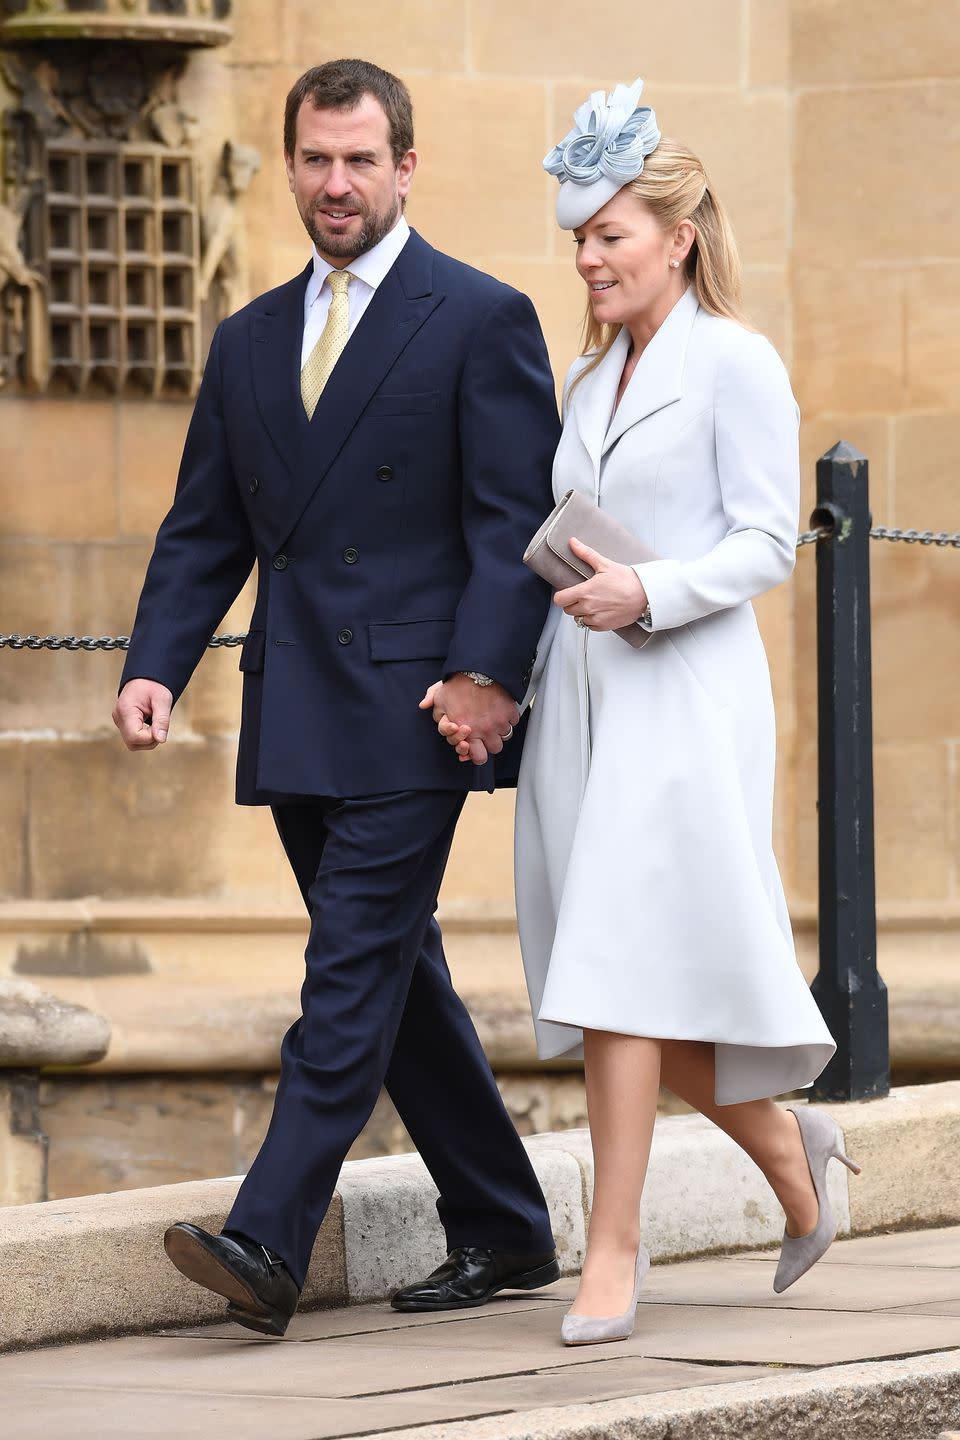 5) Peter Phillips and Autumn Phillips